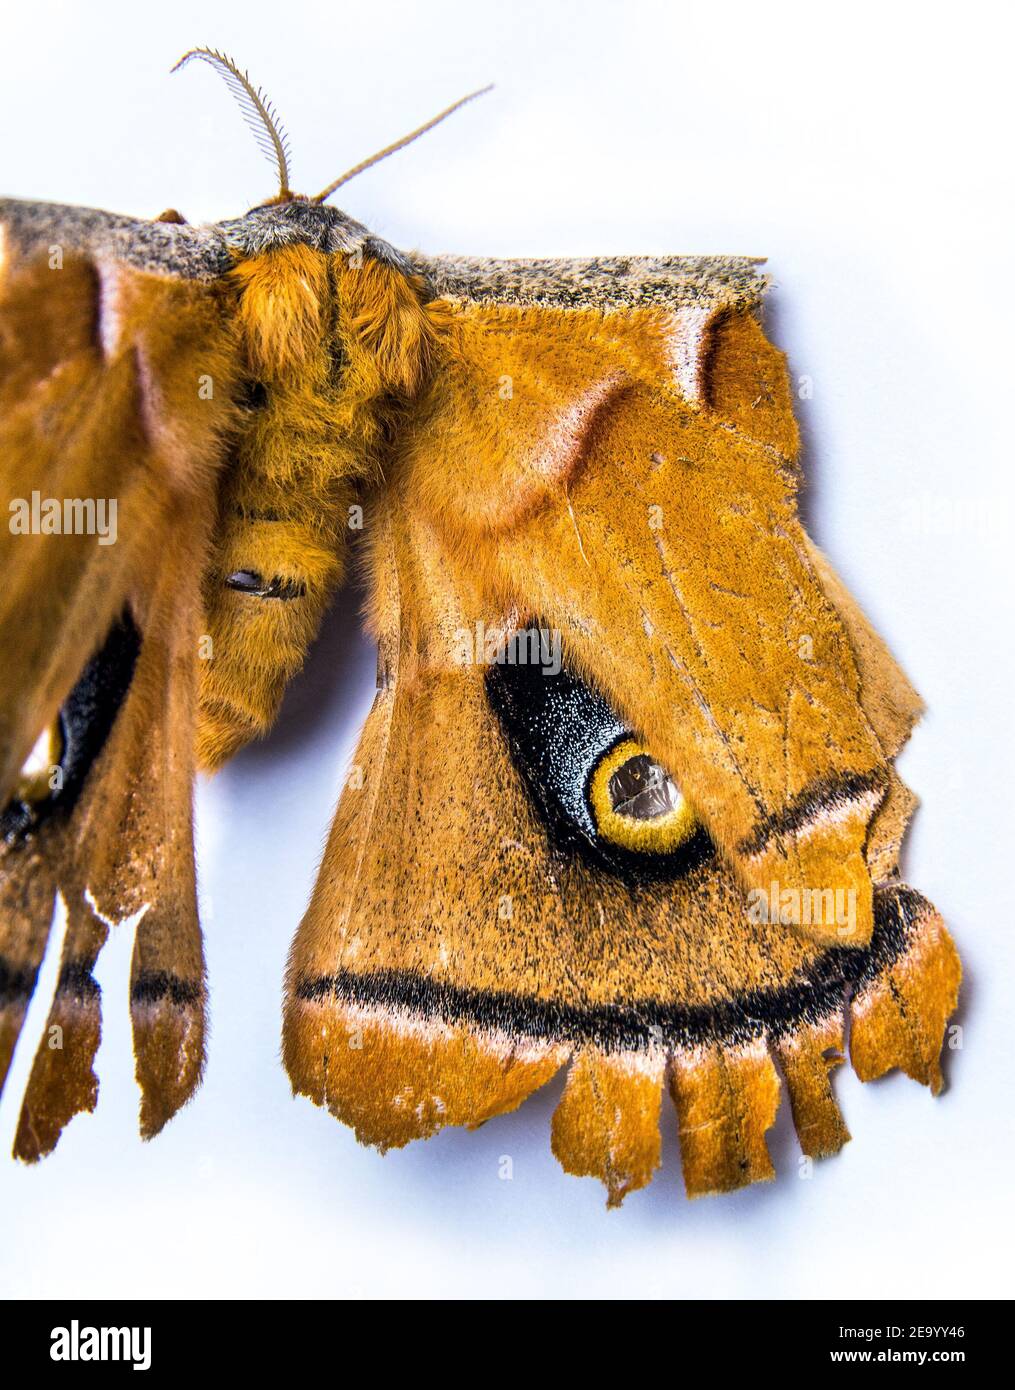 Macro image of eye spot noted on moth's wing. Moth with a fake eye markings on its wing will confuse predators. Stock Photo